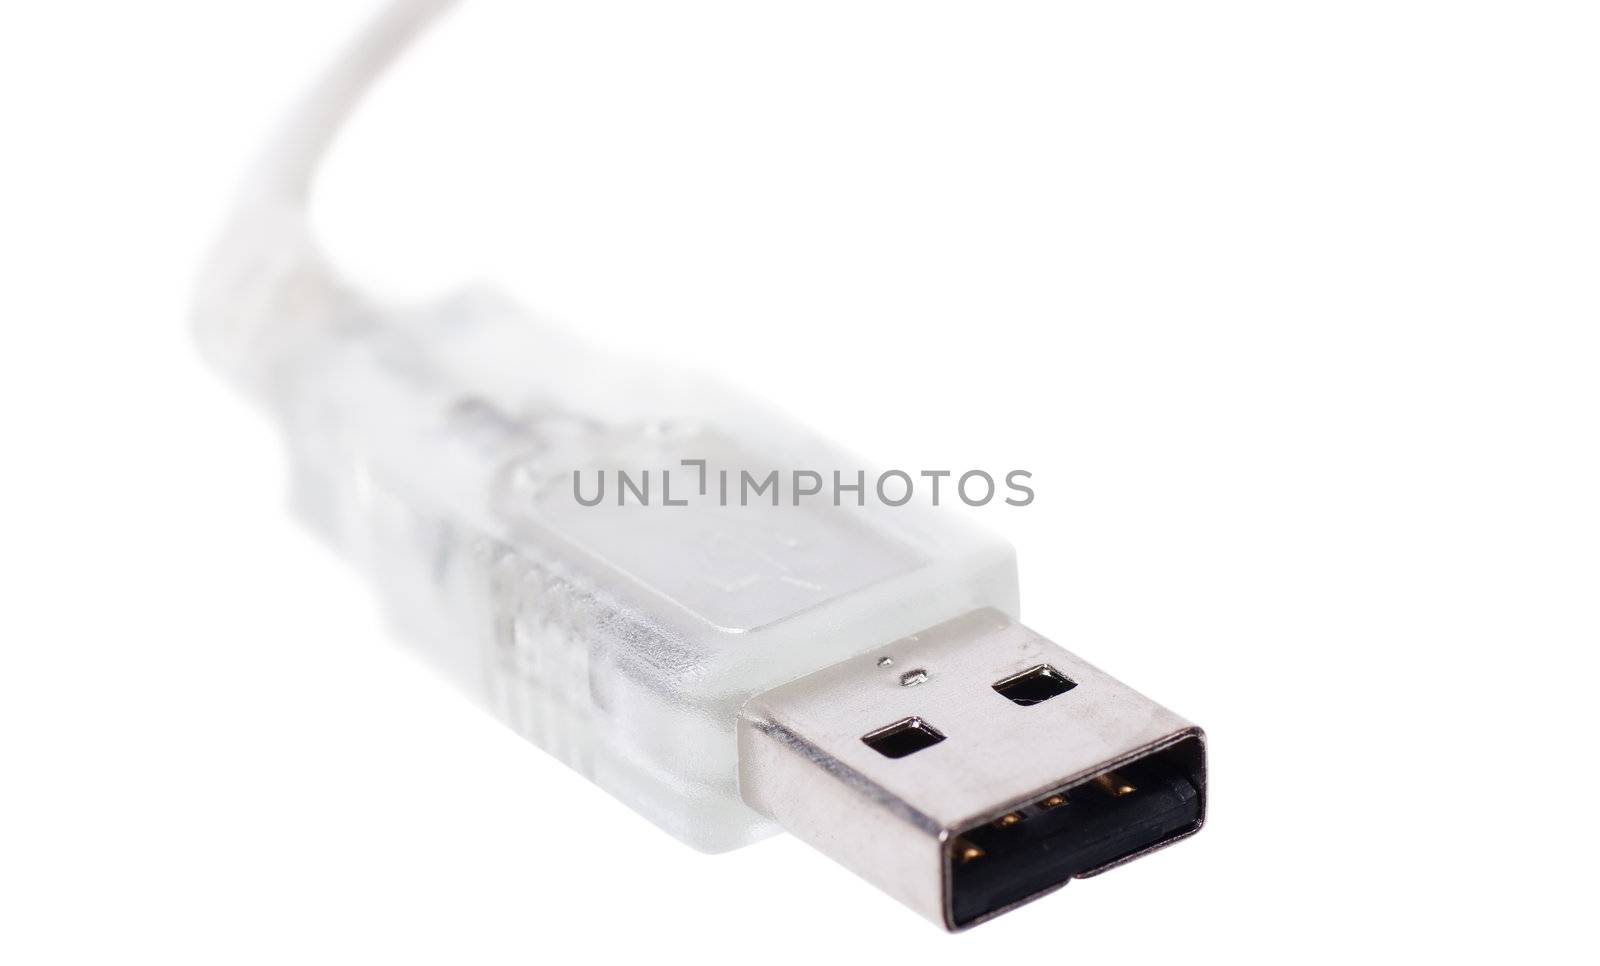 Usb cable plug on the white background